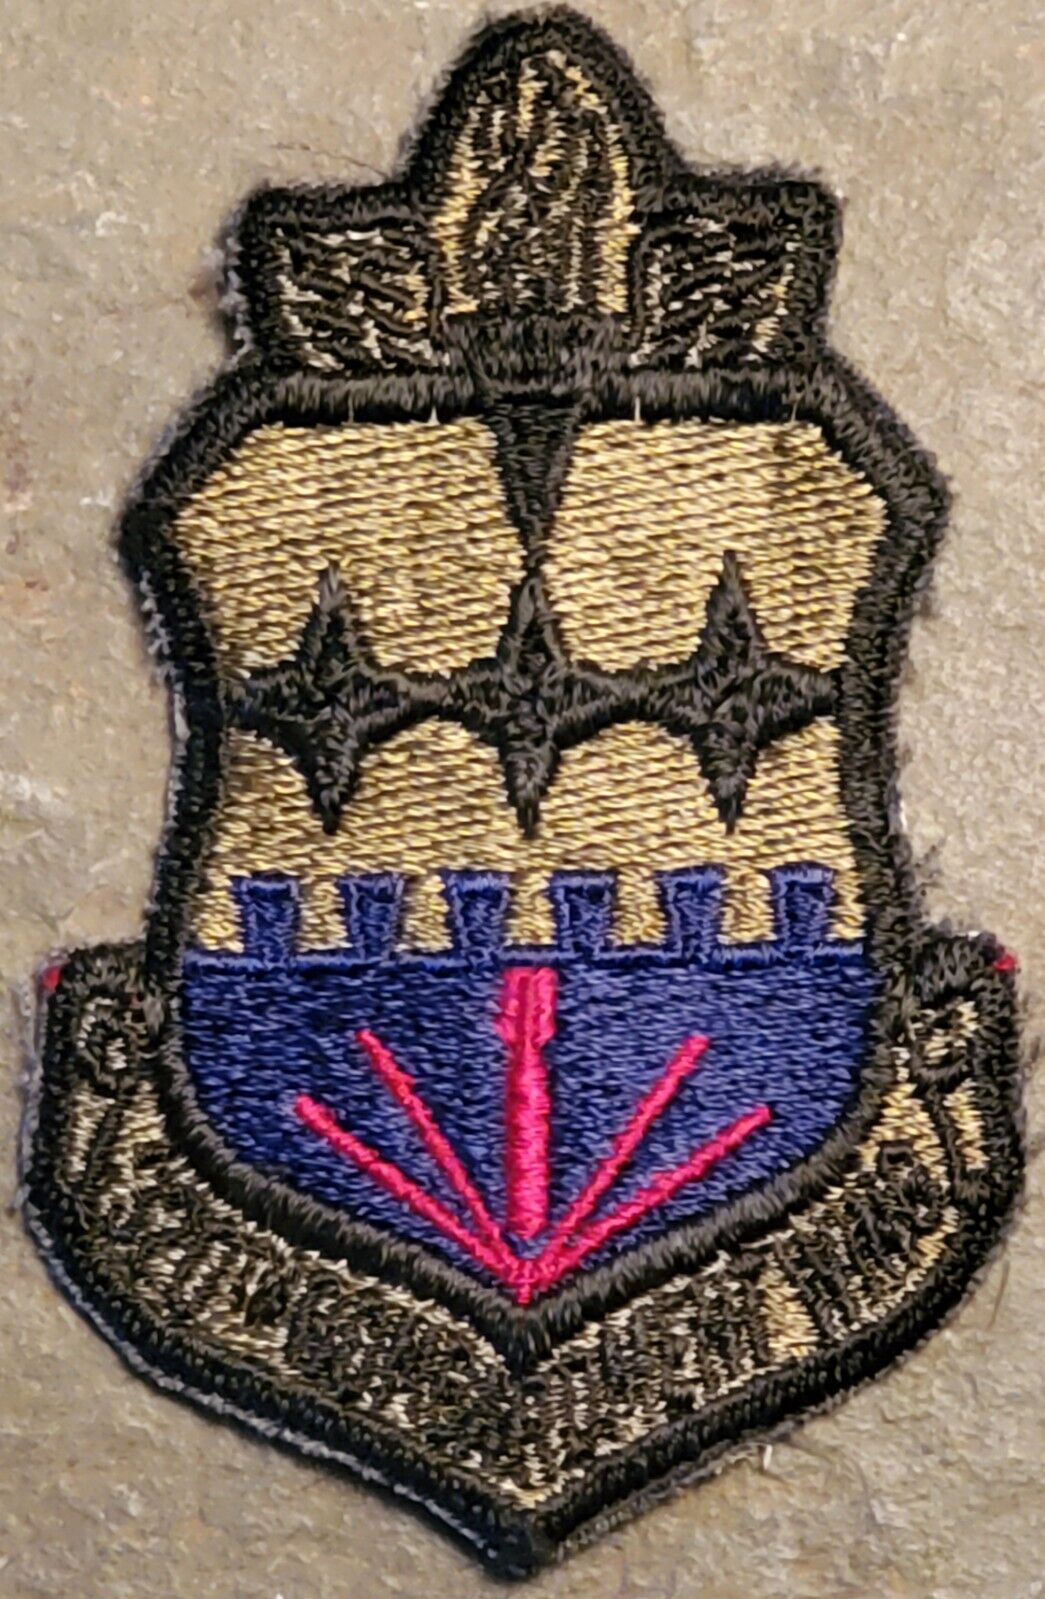 320th BOMBARDMENT WING PATCH USAF AIR FORCE VINTAGE  SUBDUED ORIGINAL MILITARY 